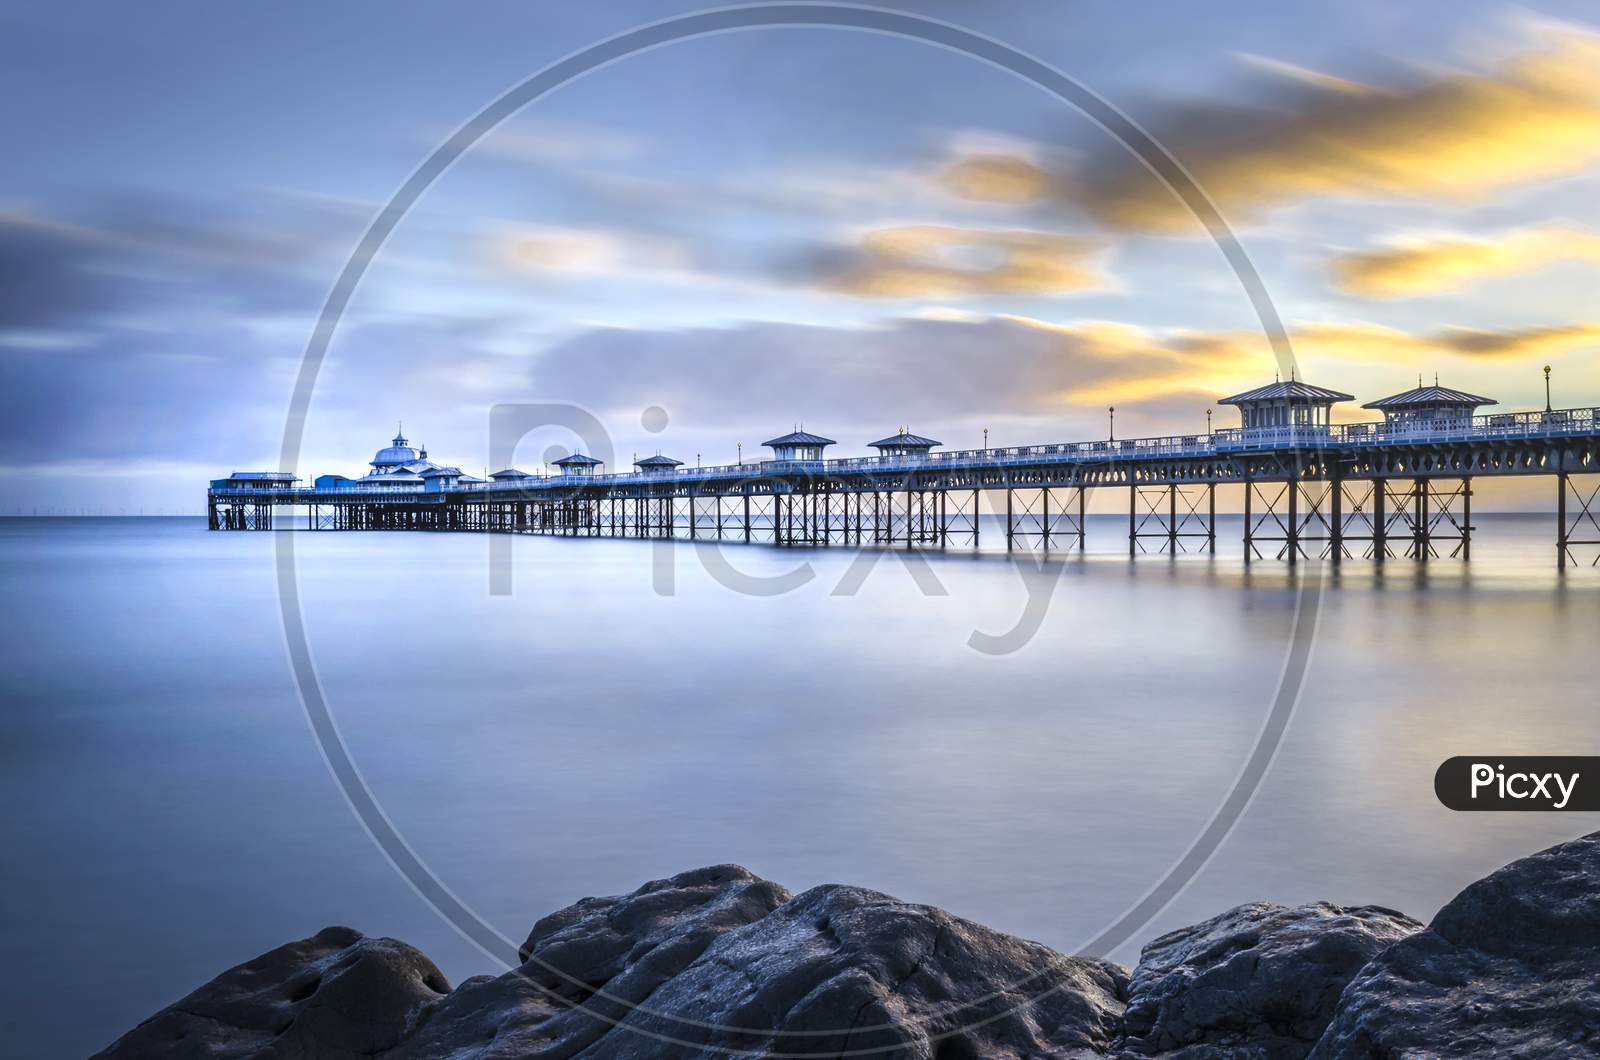 A morning shot of the Pier at Llandudno showing the calm water and floating clouds.